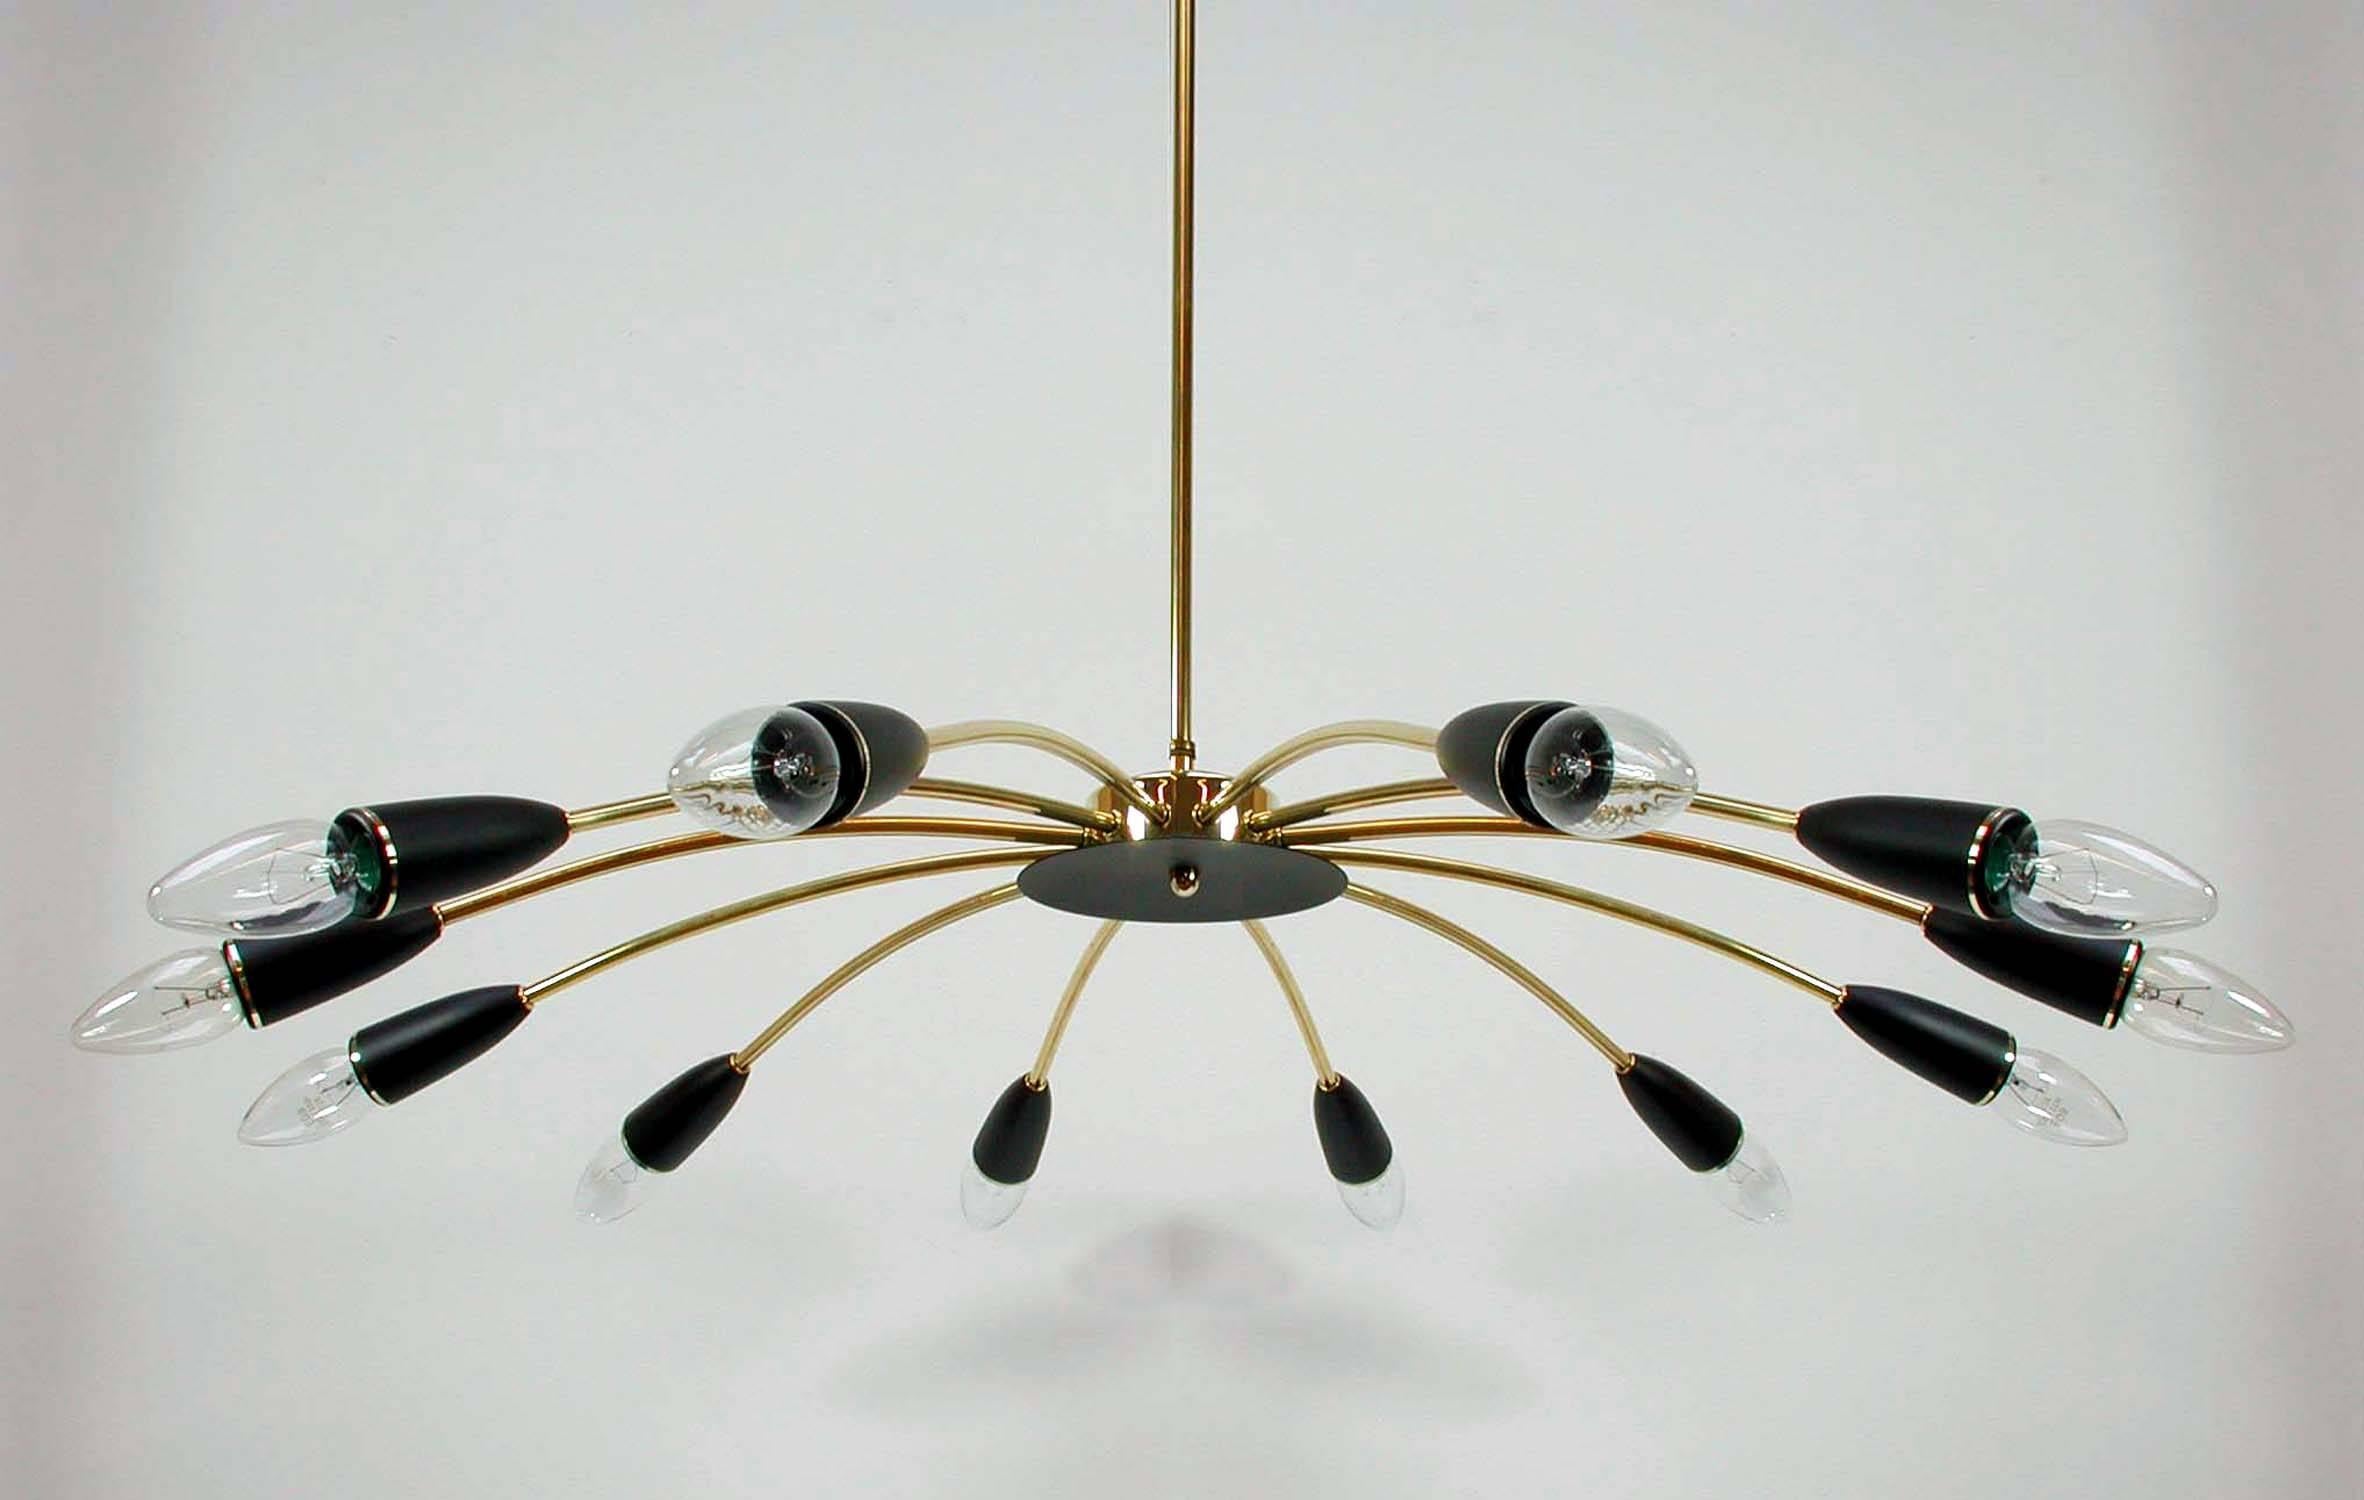 This elegant Sputnik style chandelier was manufactured in Italy in the 1950s. It is made of brass and has got 12 black lacquered Bakelite bulb holders (E14).

The brass lamp rod can be shortened or removed. When removed the chandelier can be used